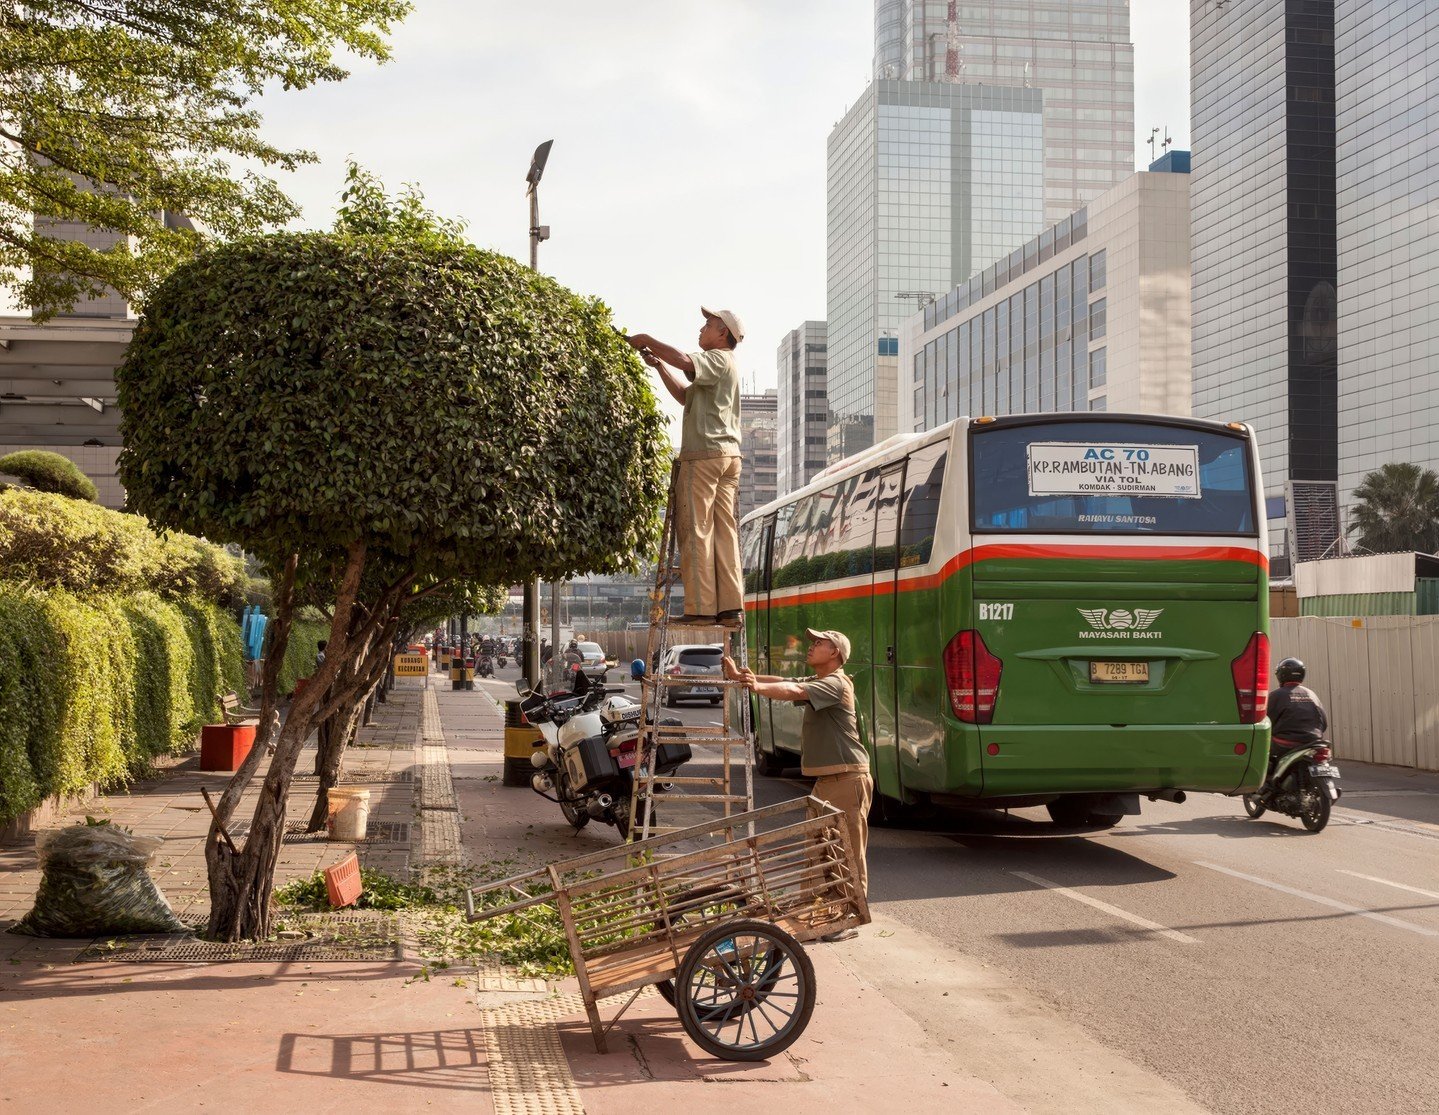 📸 &quot;Jakarta - Intervened and Improvised&quot; by Isidro Ramirez: Capturing the Pulse of Urban Innovation 🌆🇮🇩 Before embarking on the AI-enhanced phase of this project, Isidro Ramirez's &quot;Jakarta - Intervened and Improvised&quot; masterful